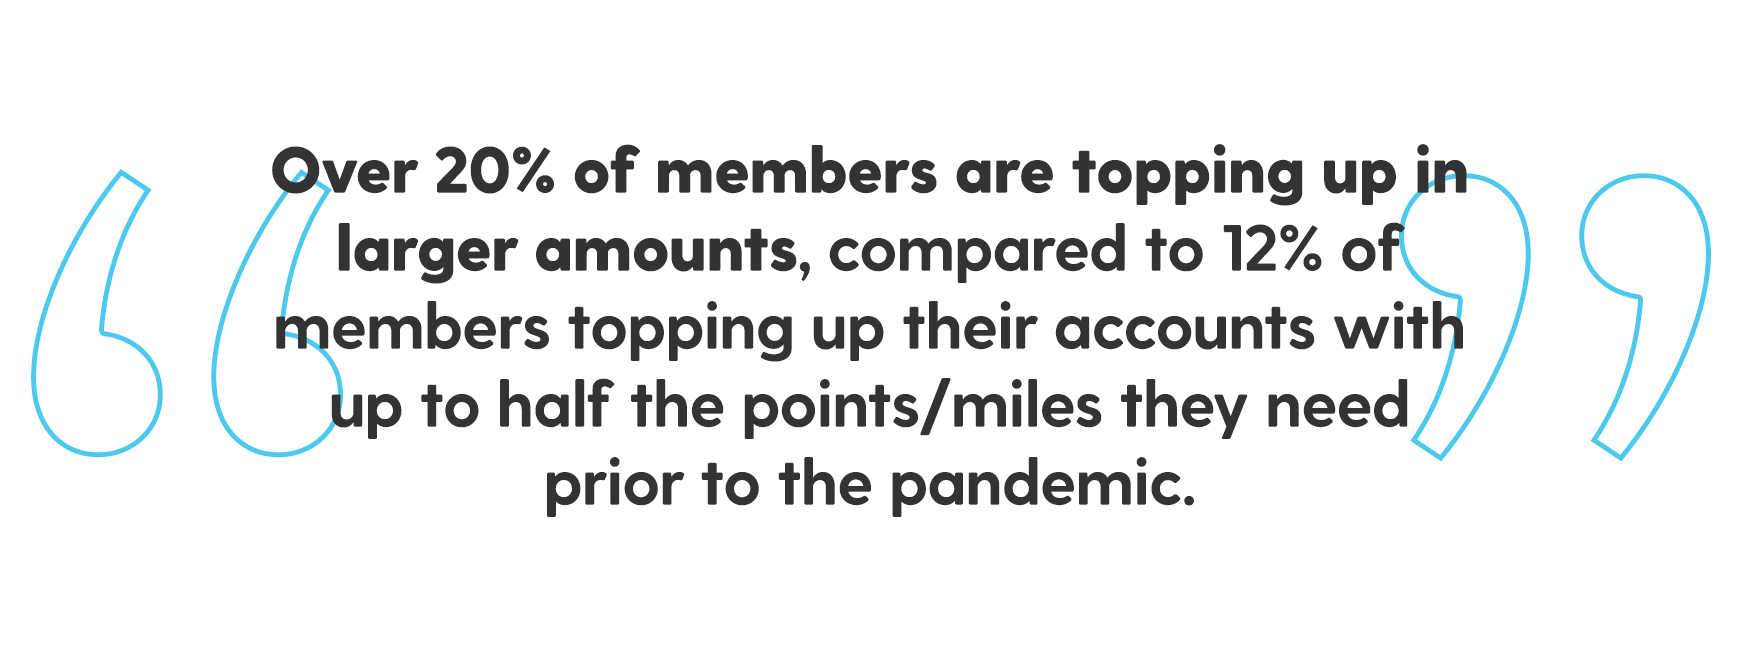 Quote: over 20 percent of members are topping up in larger amounts, compared to 12 percent of member topping up their accounts with up to half of points/miles they need prior to the pandemic.